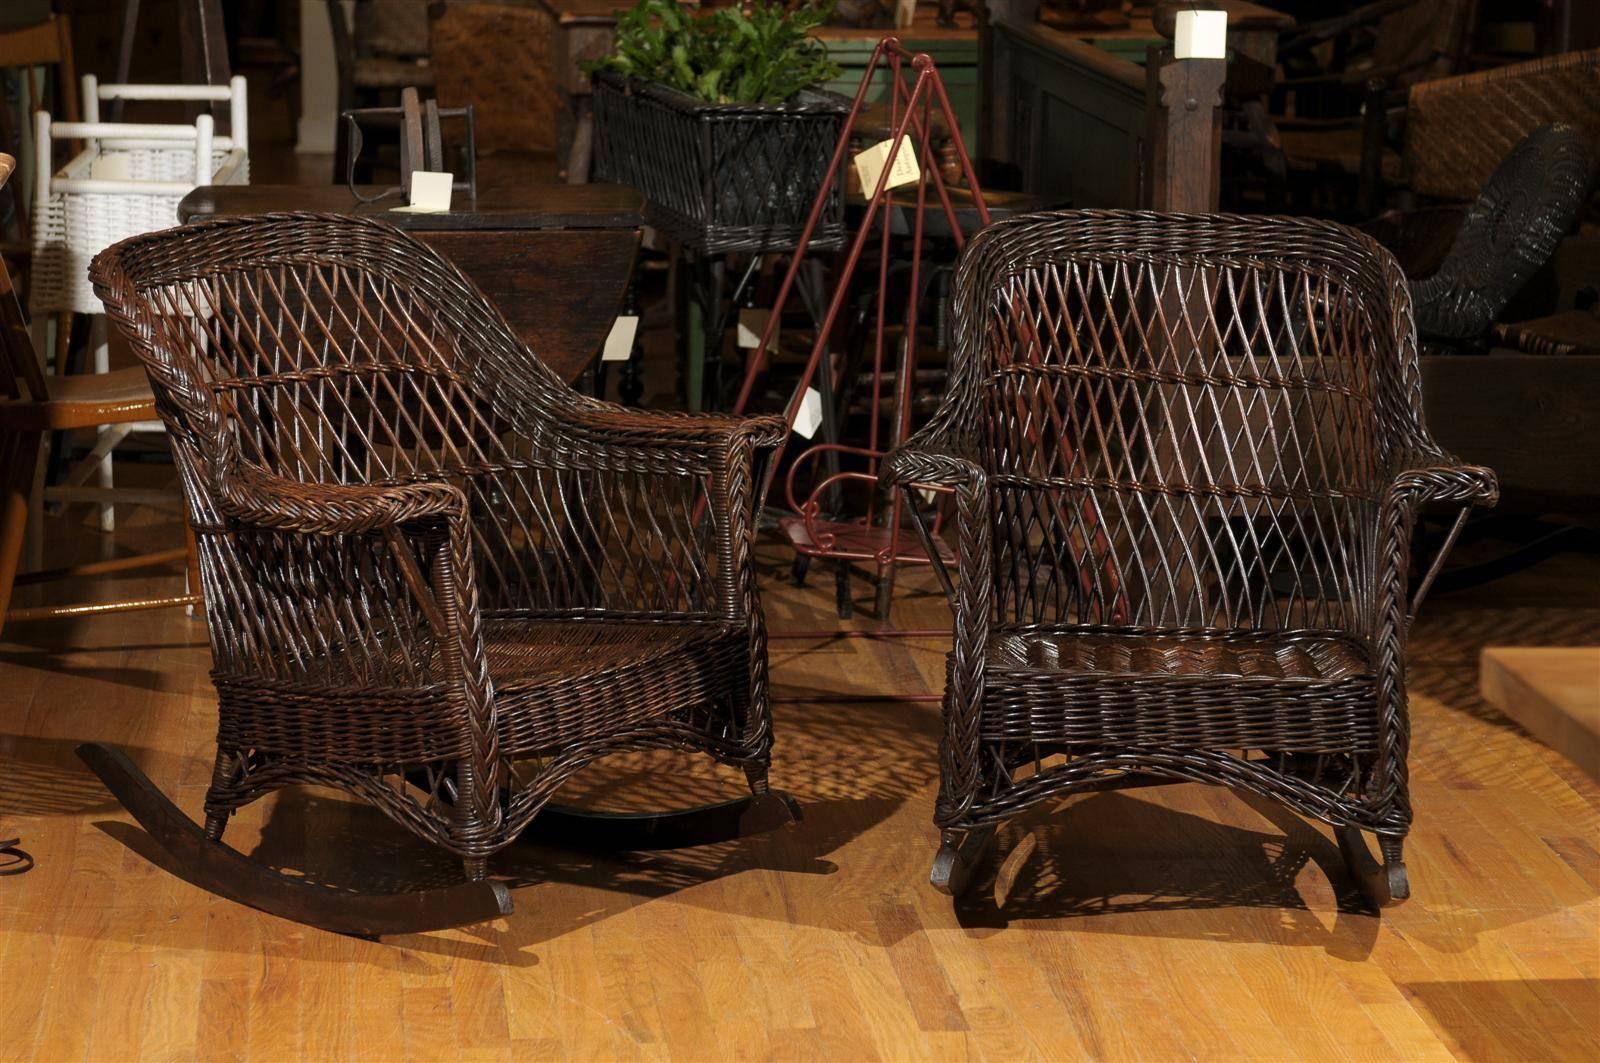 This Bar Harbor style pair of Heywood-Wakefield wicker rockers is signed and naturally woven. This pair of rockers is stained brown.